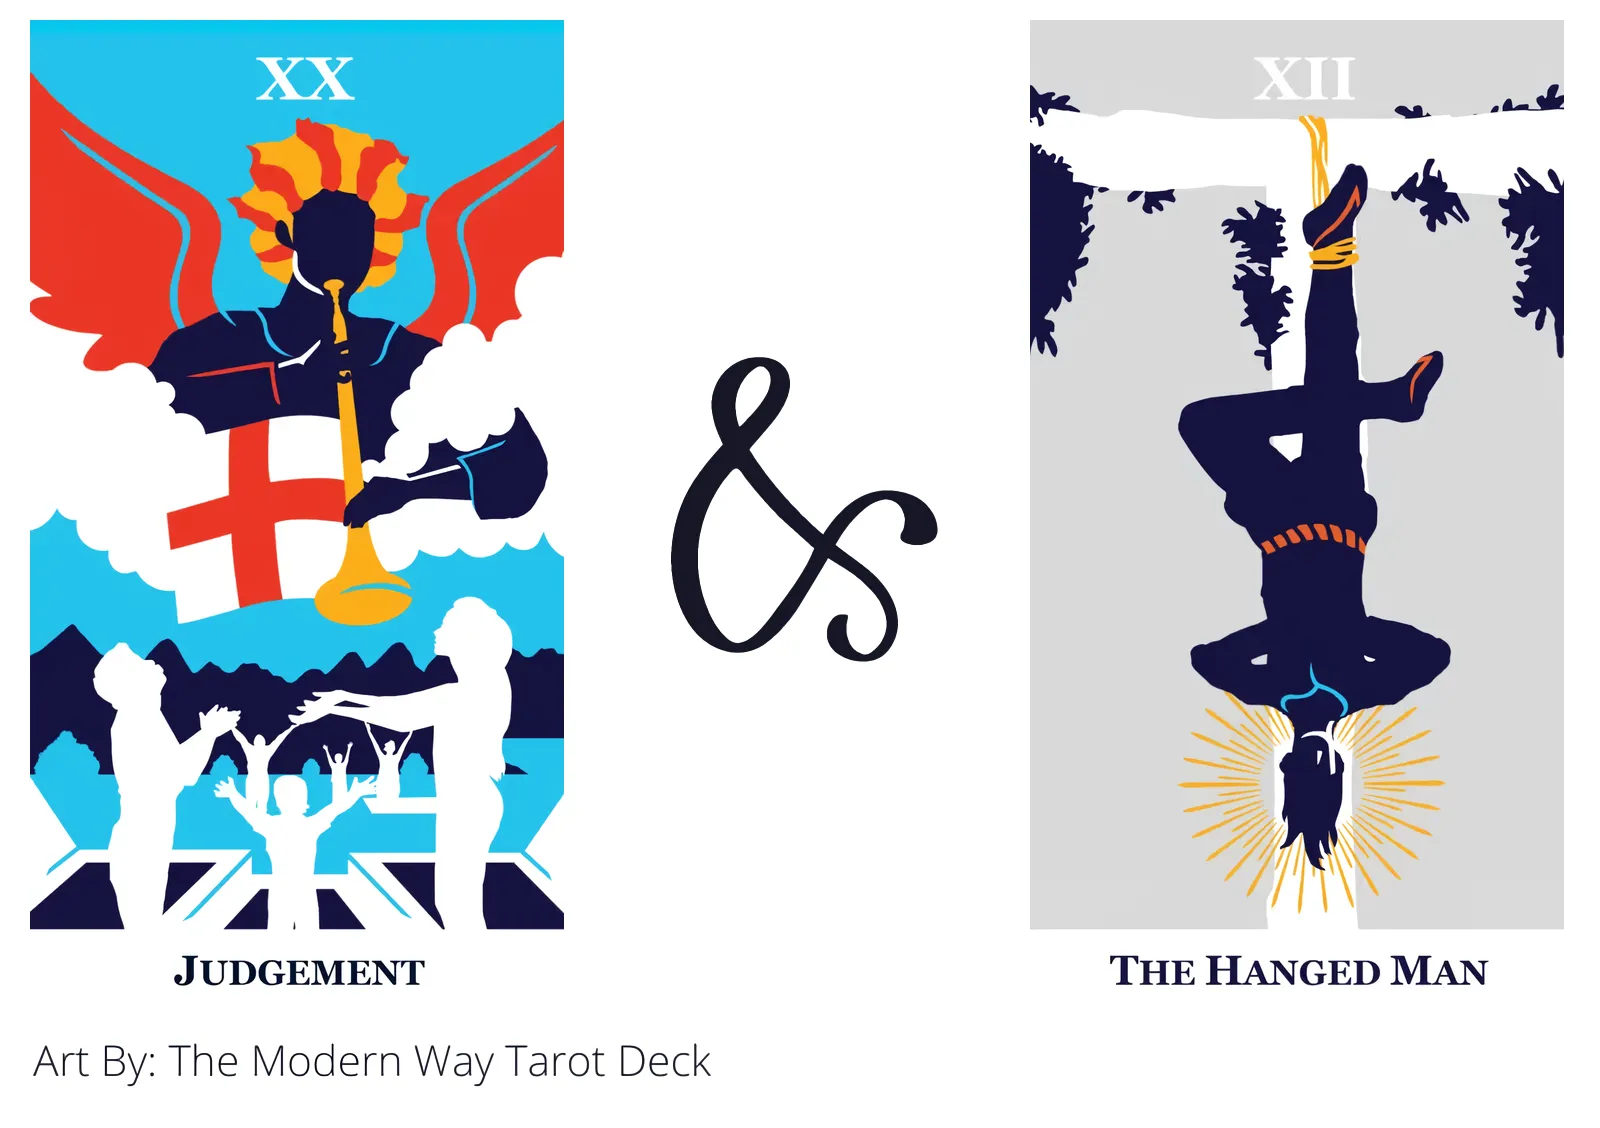 judgement and the hanged man tarot cards together